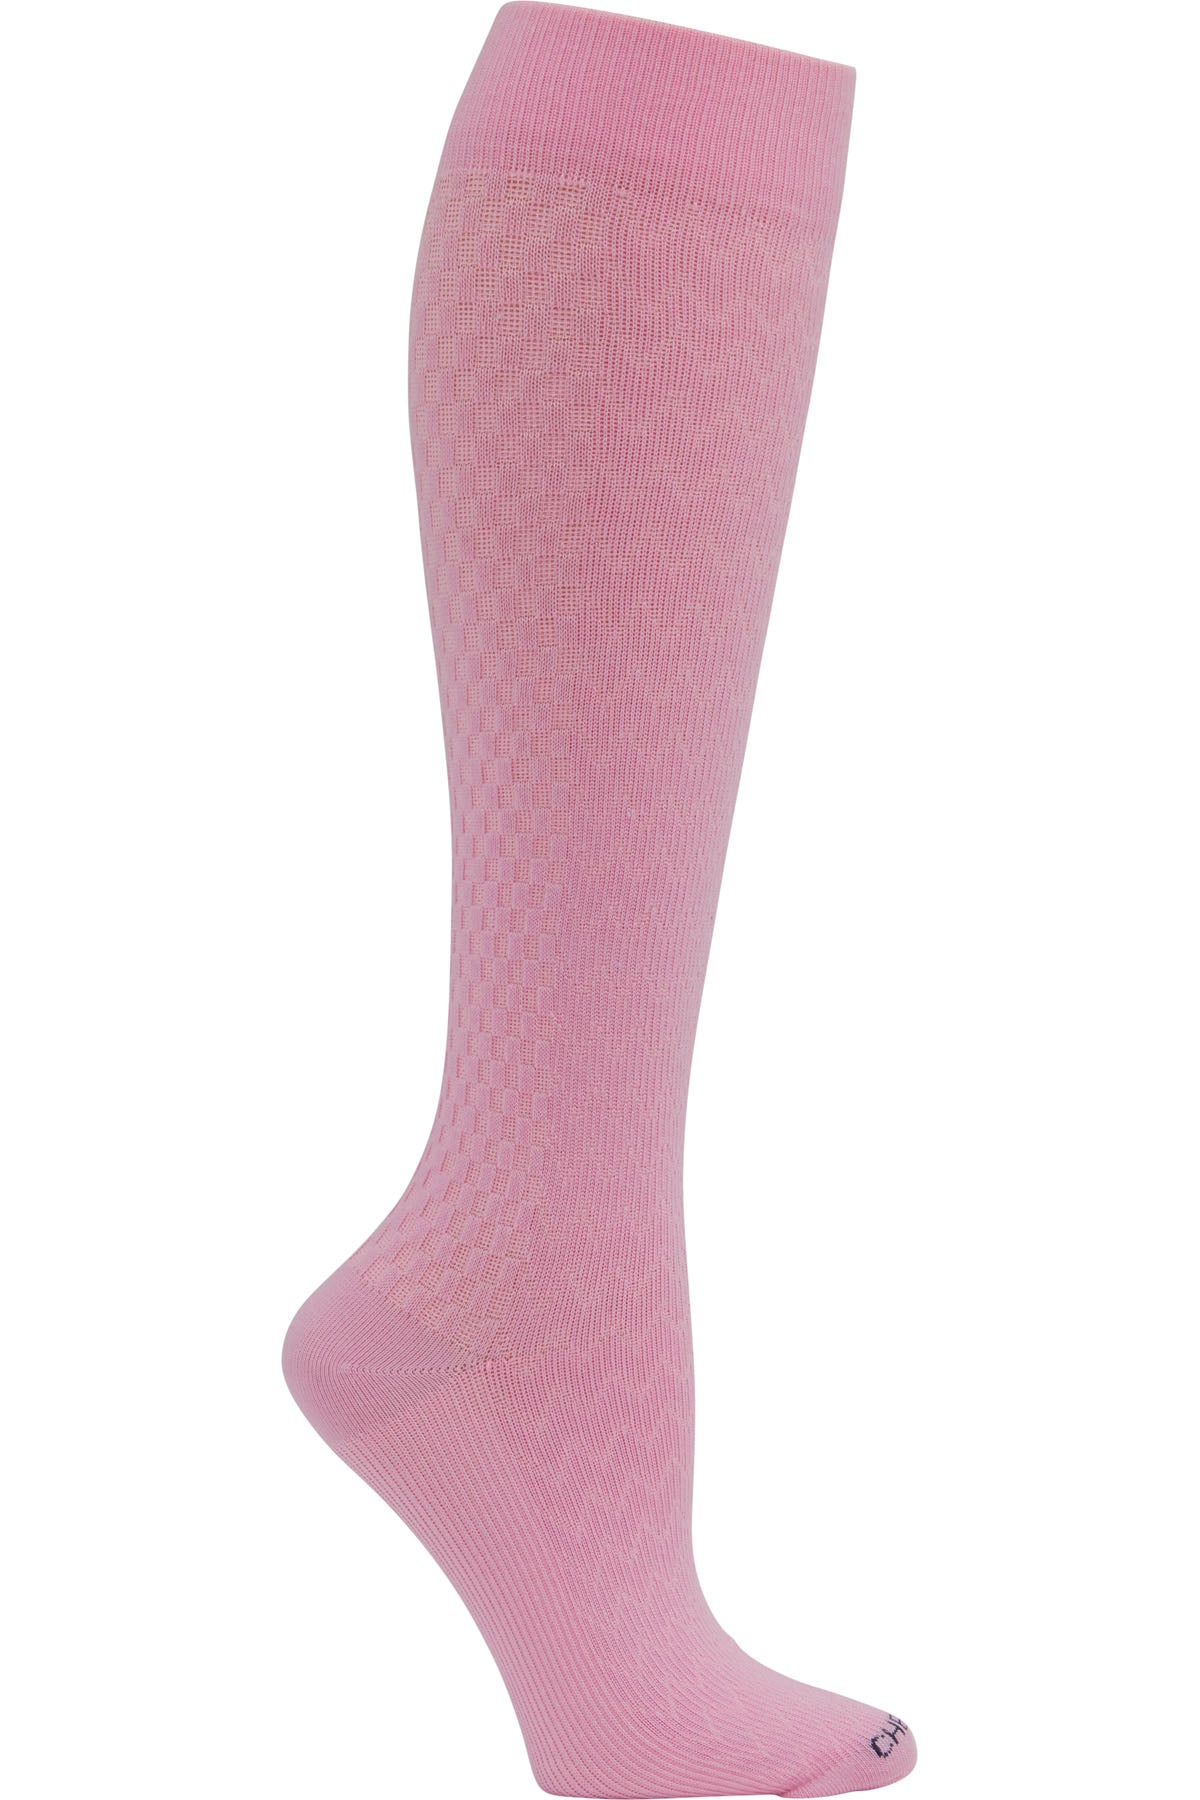 Cherokee Plus Size Mild Compression Wide Calf Socks True Support 10-15 mmHg in Carnation at Parker's Clothing and Shoes.